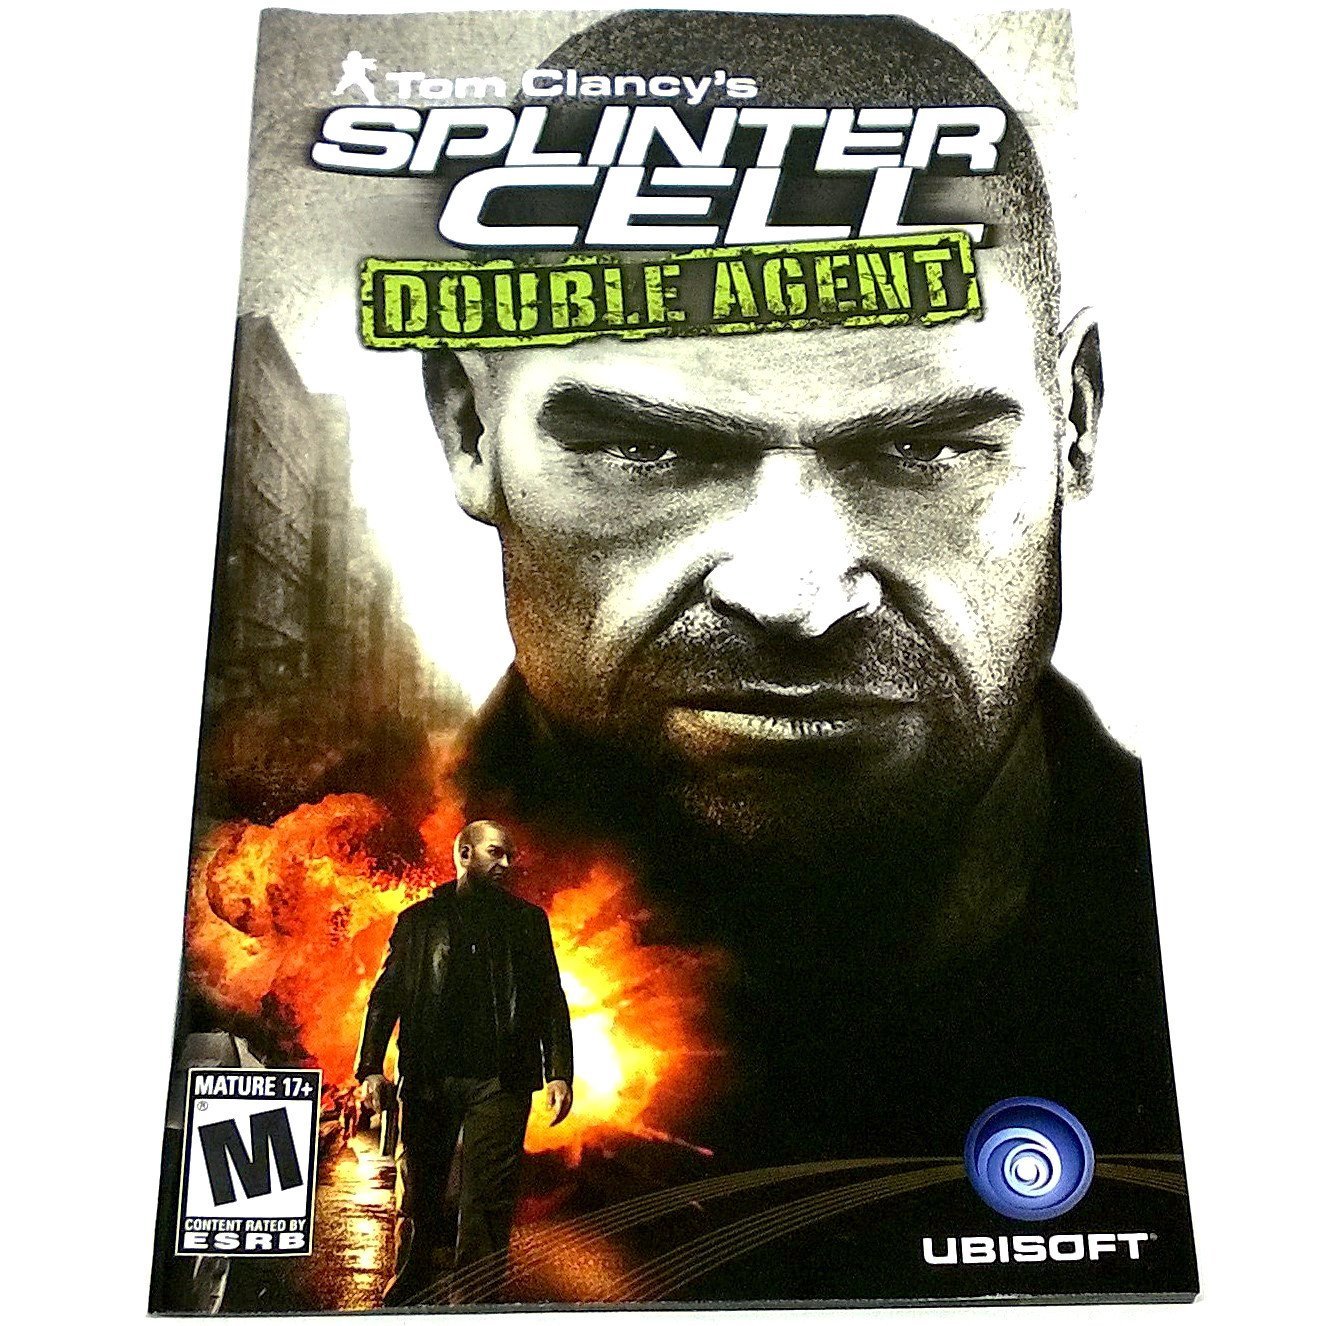 Playstation 2 PS2 Tom Clancy's Splinter Cell Video Game Complete with Manual